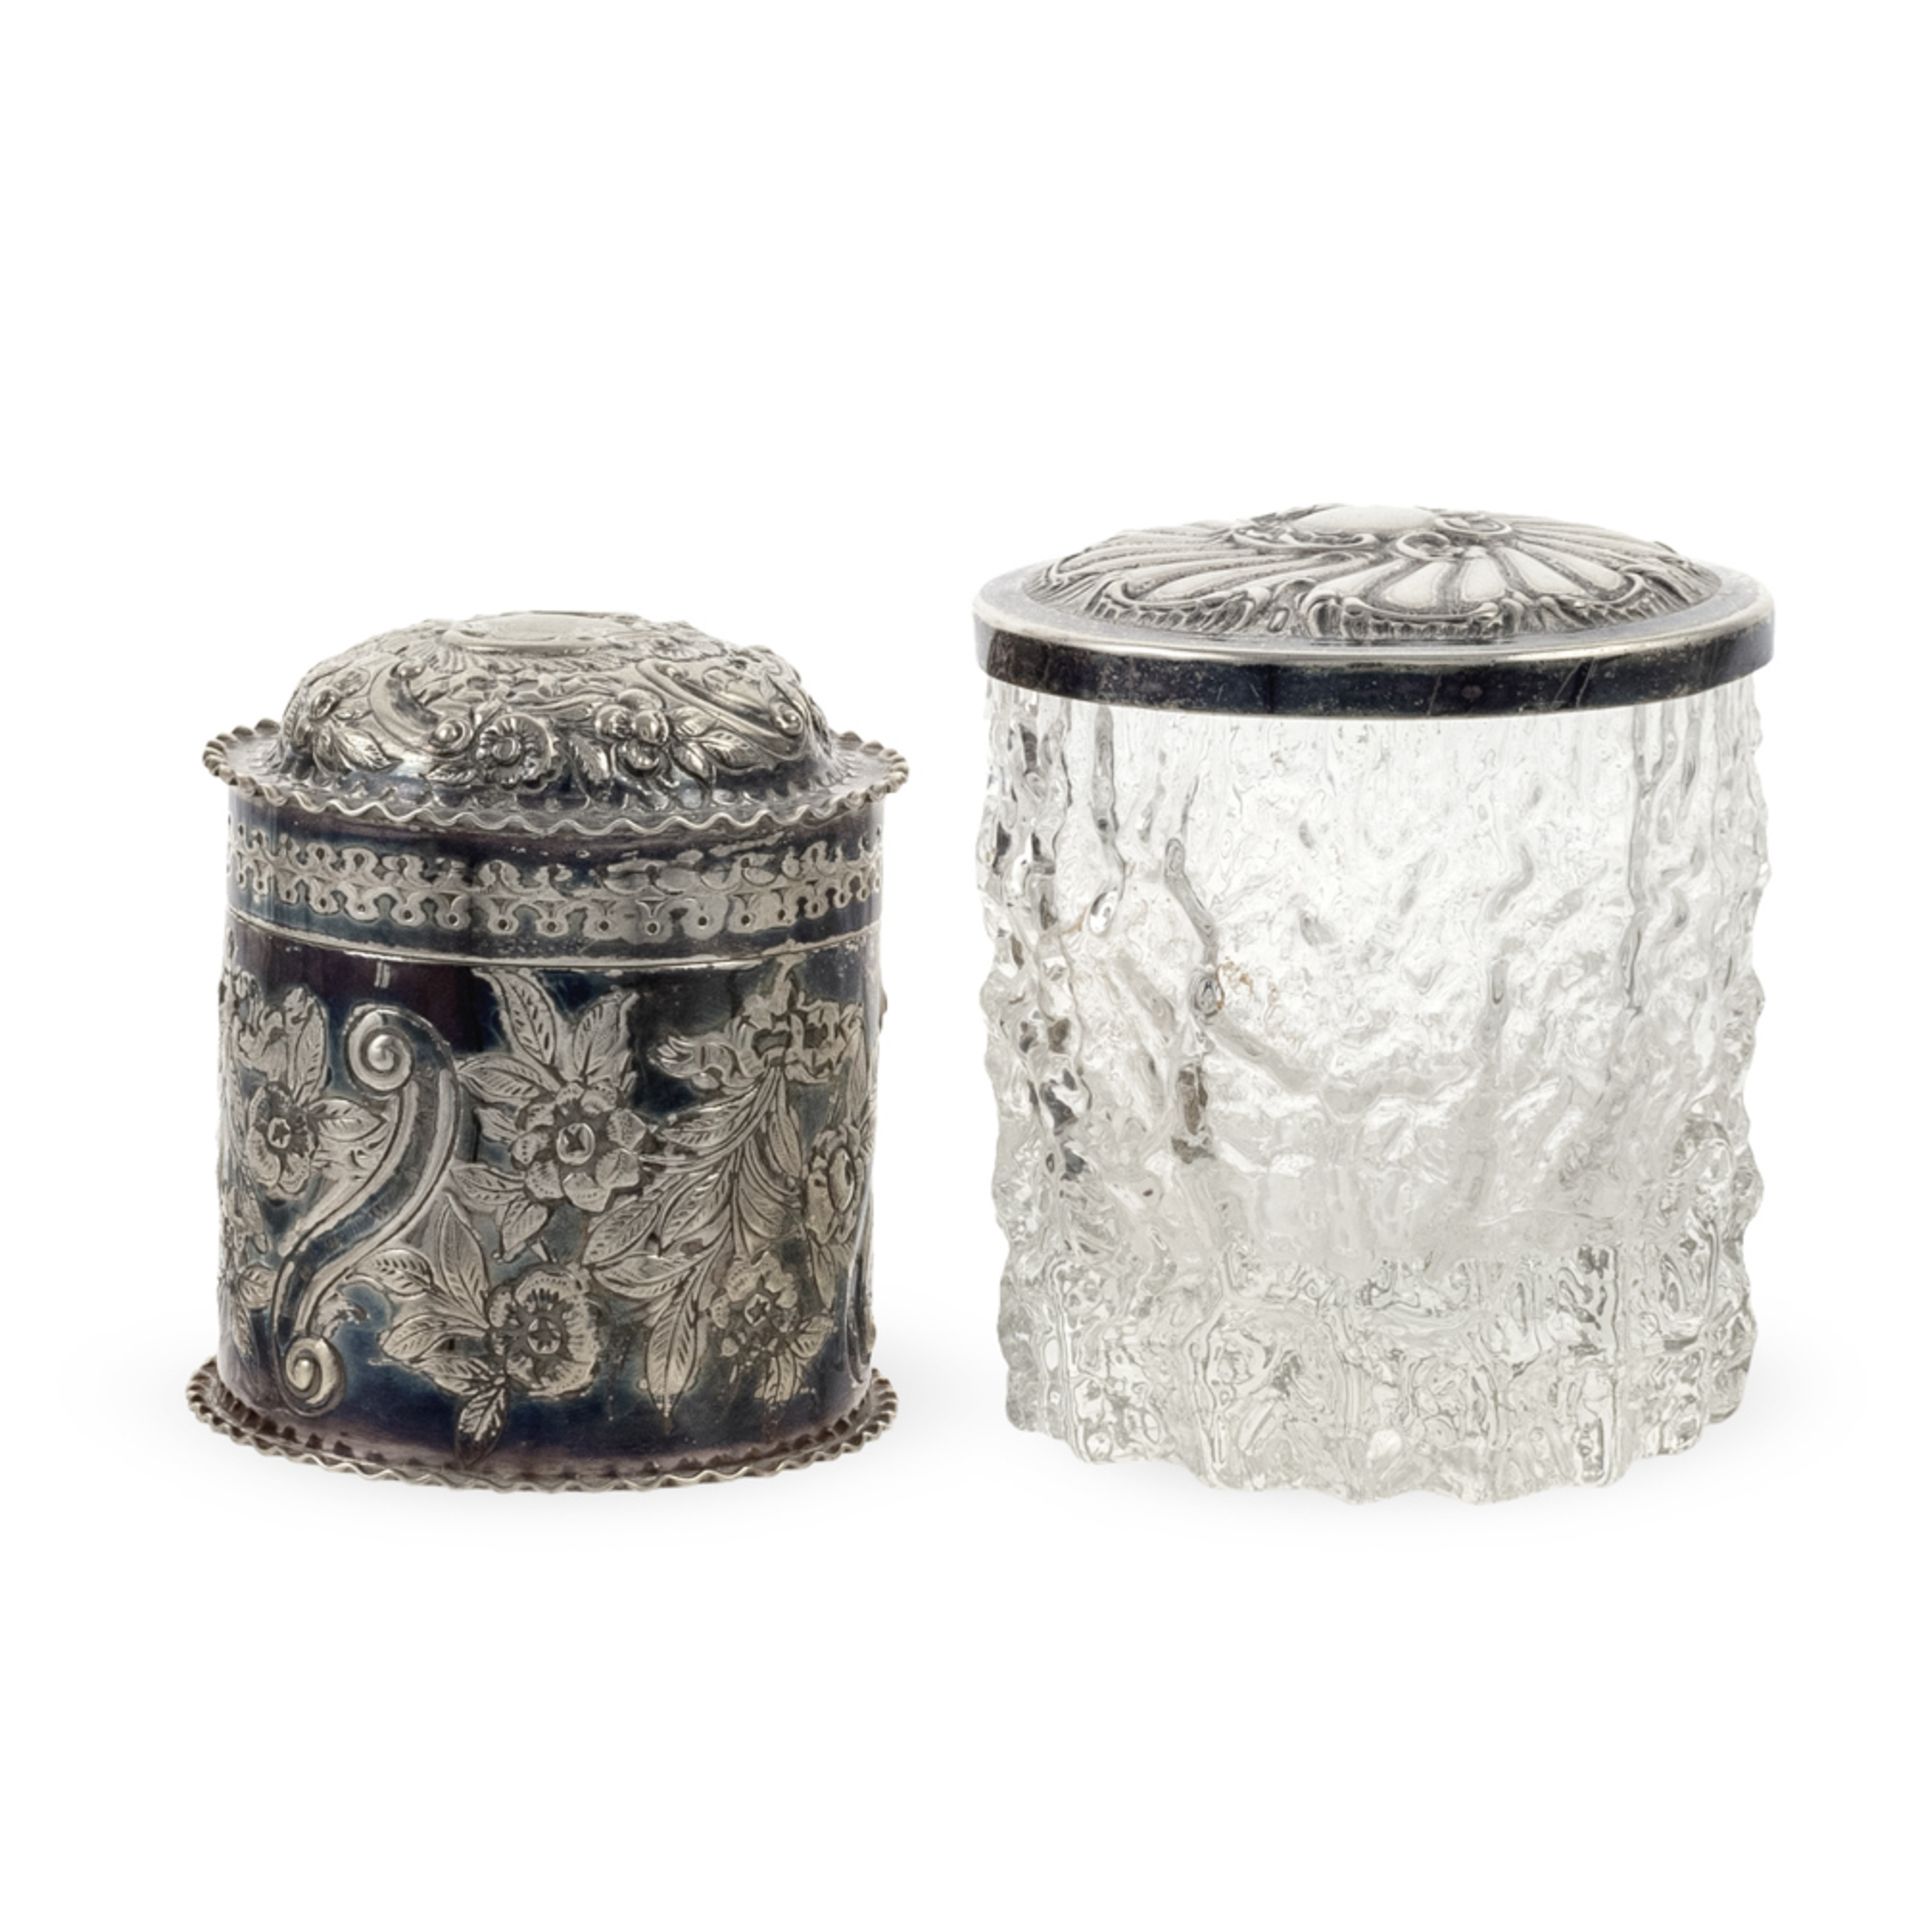 Two containers in silvered metal and ground glass